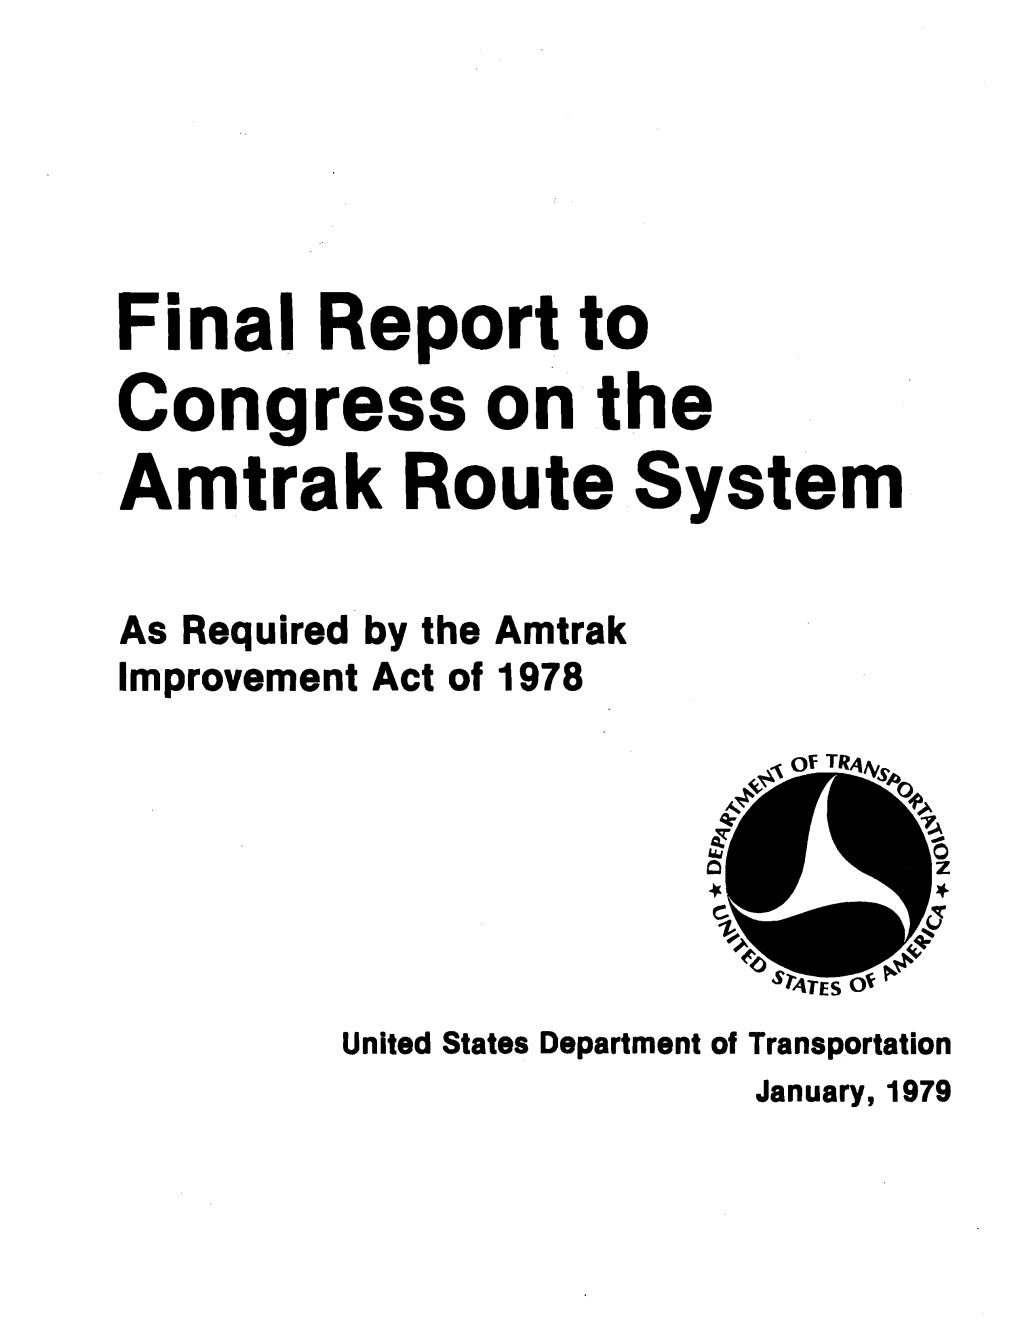 Final Report to Congress on the Amtrak Route System As Required